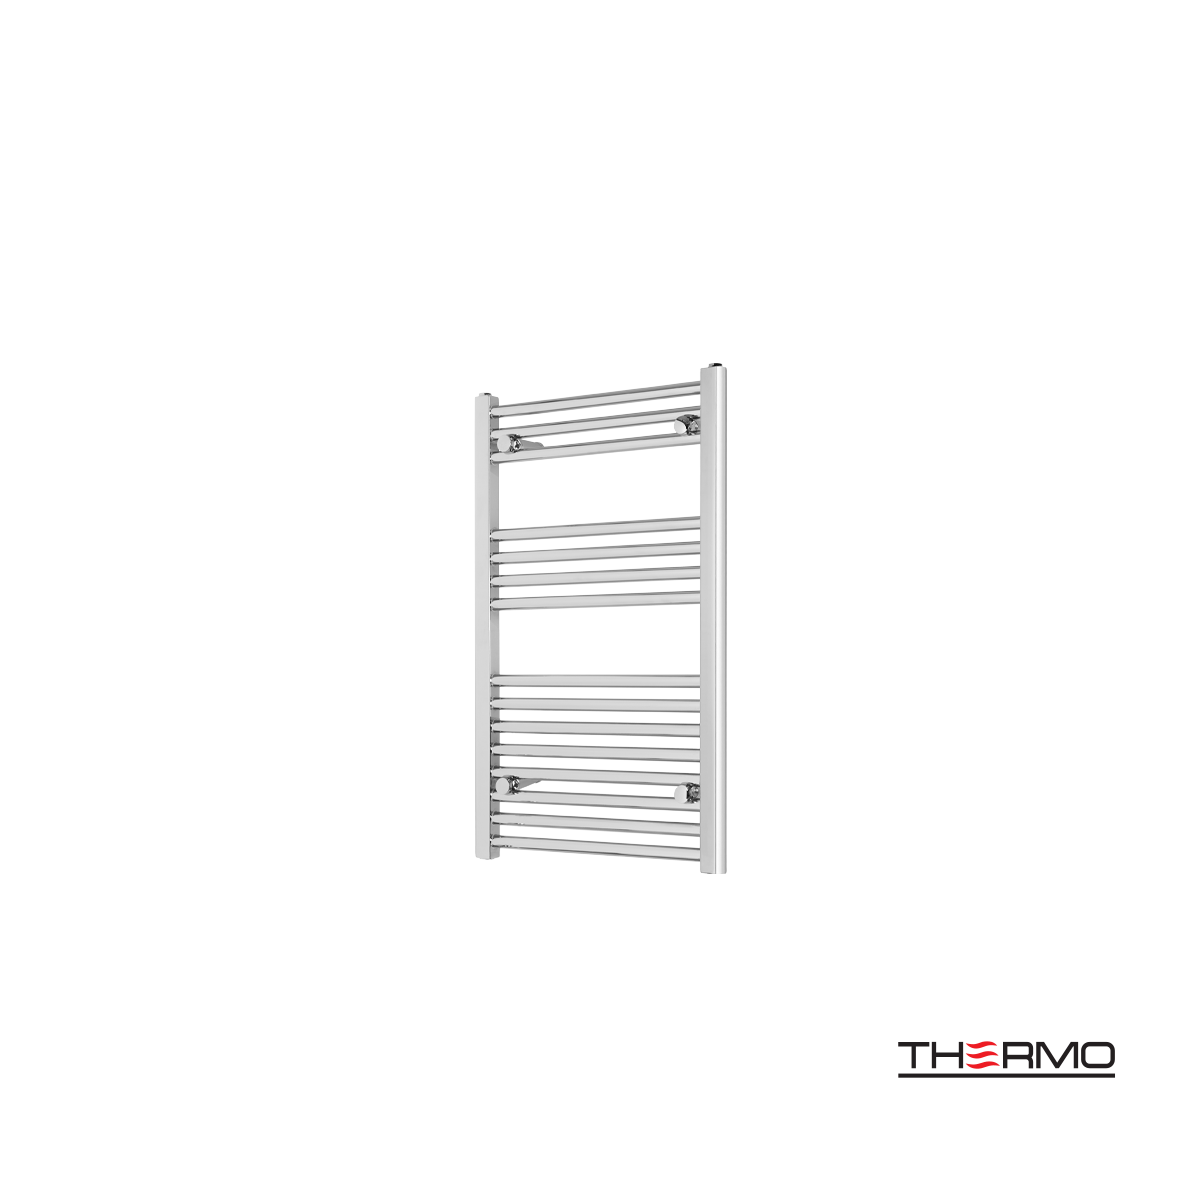 Heated towel rail ALTO 80x50 from MILD STEEL with hydraulic or e